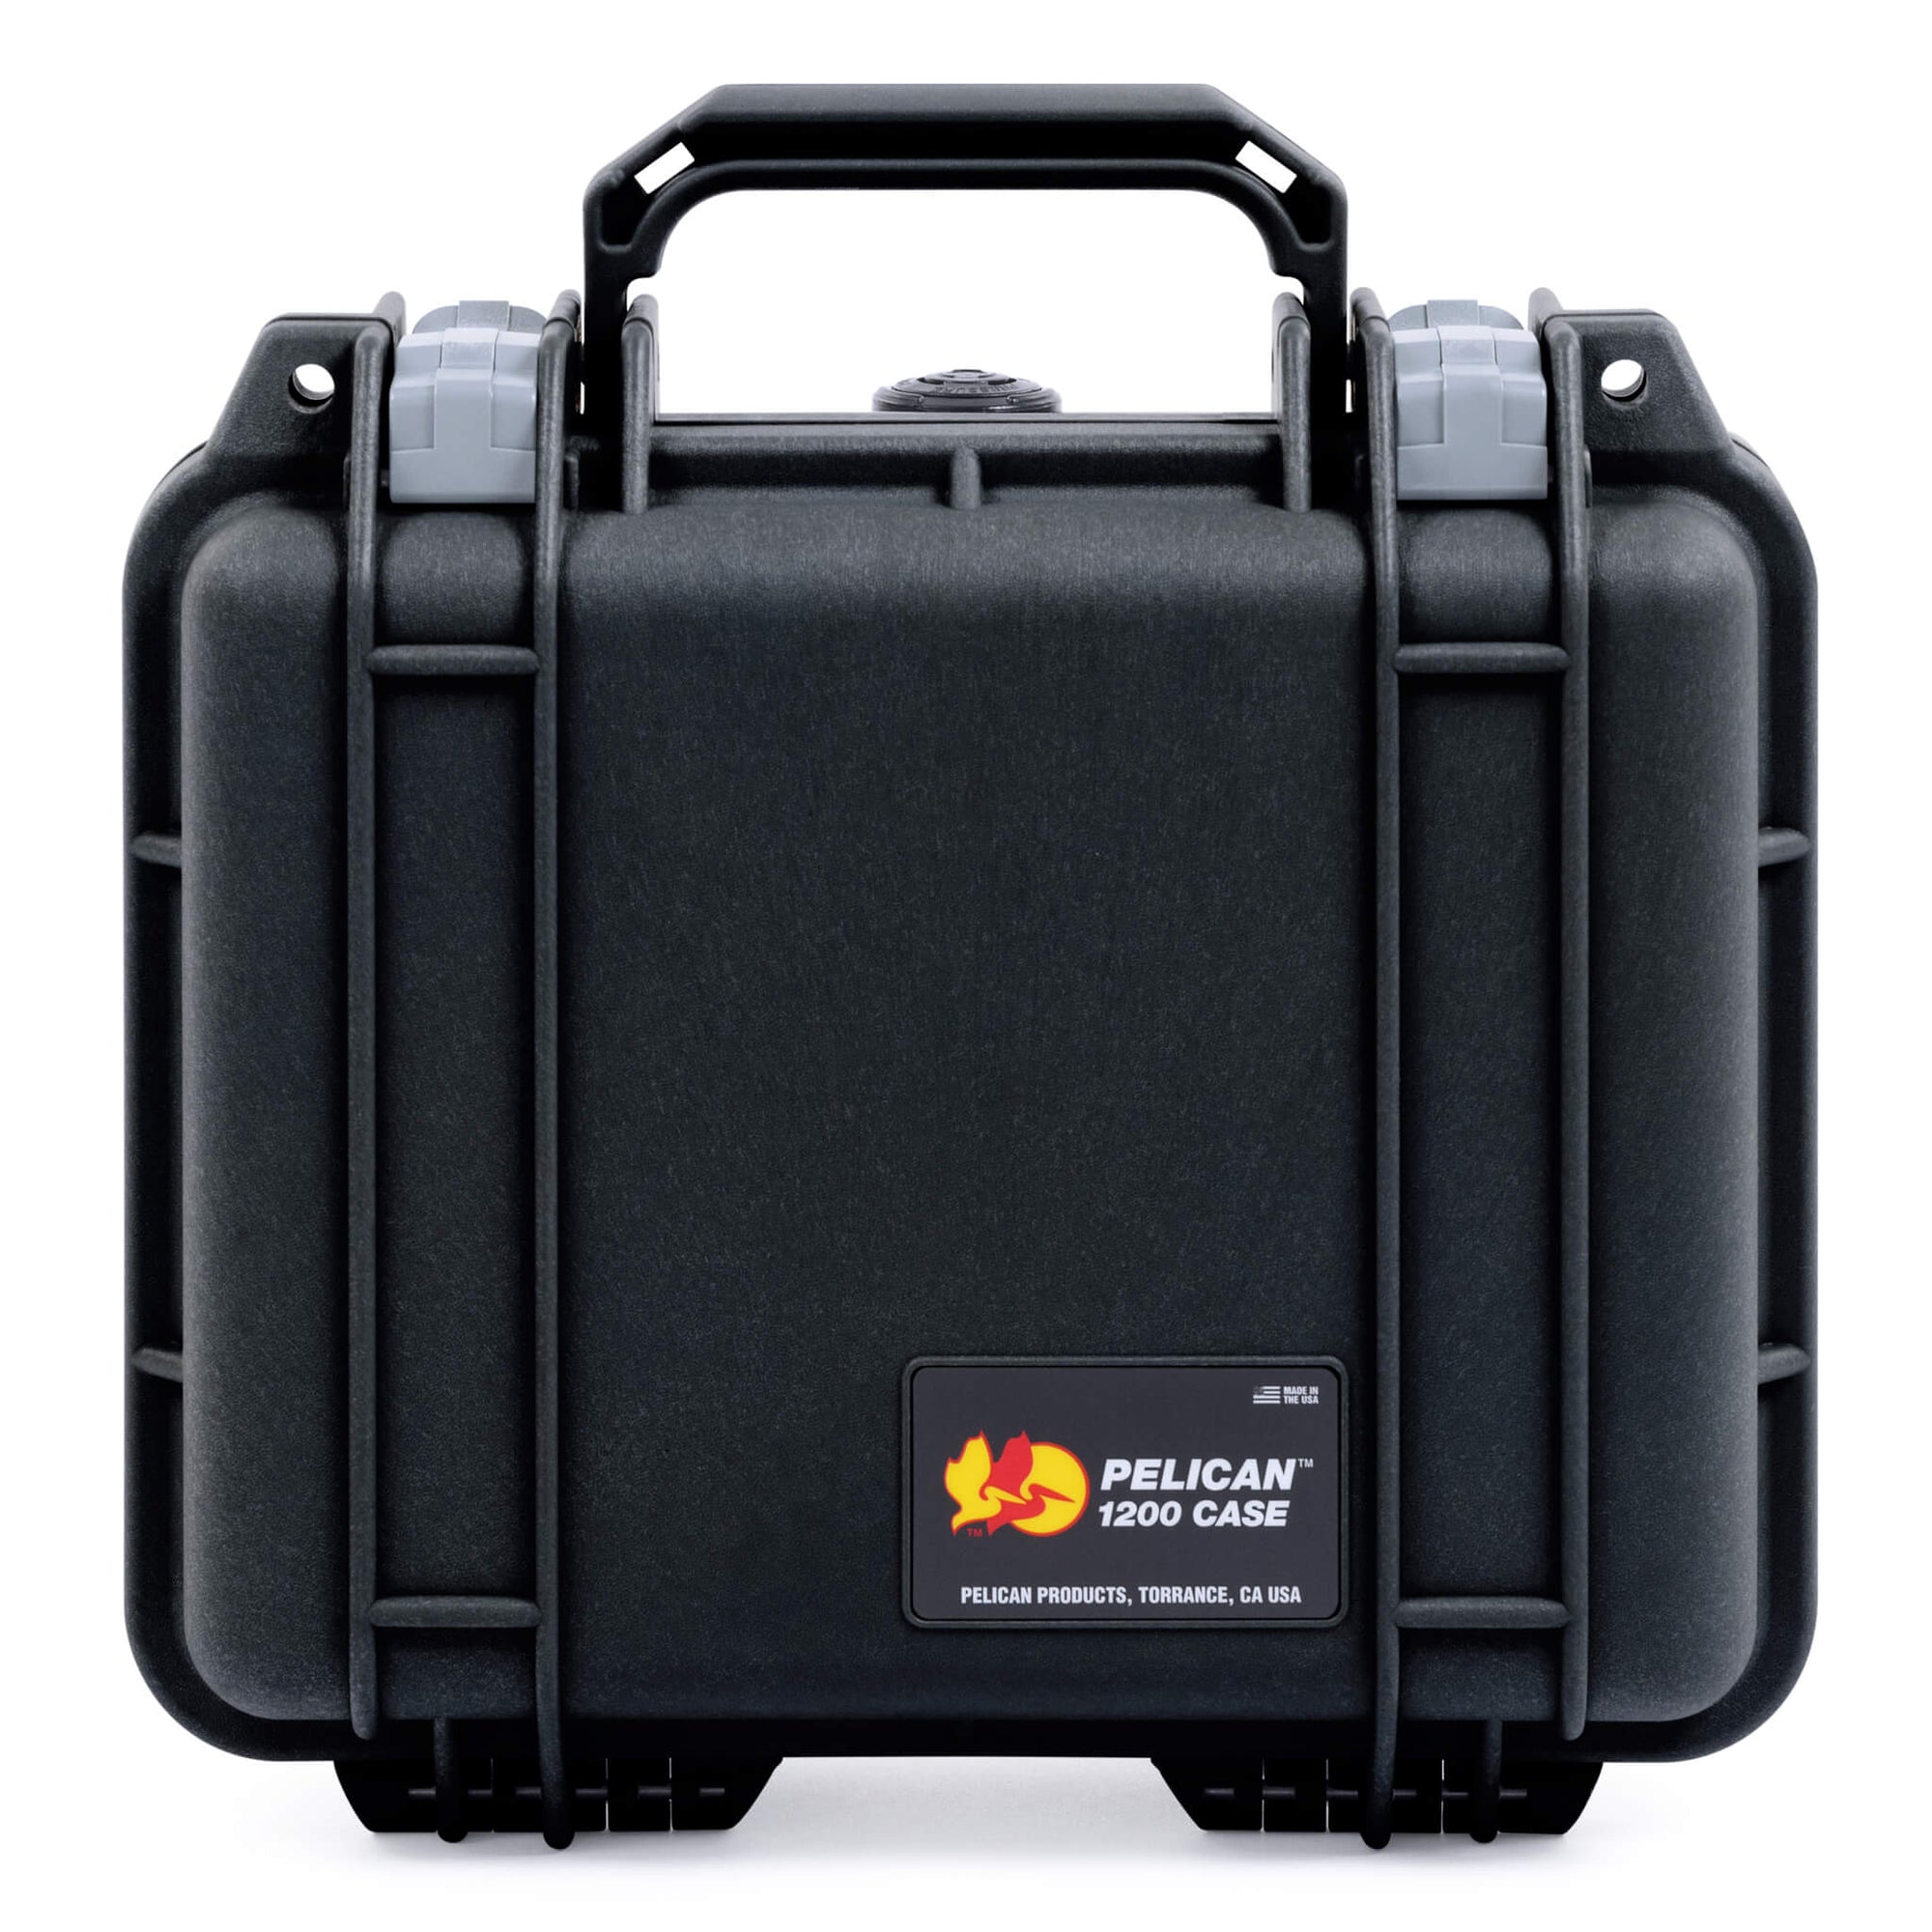 Pelican 1200 Case, Black with Silver Latches ColorCase 